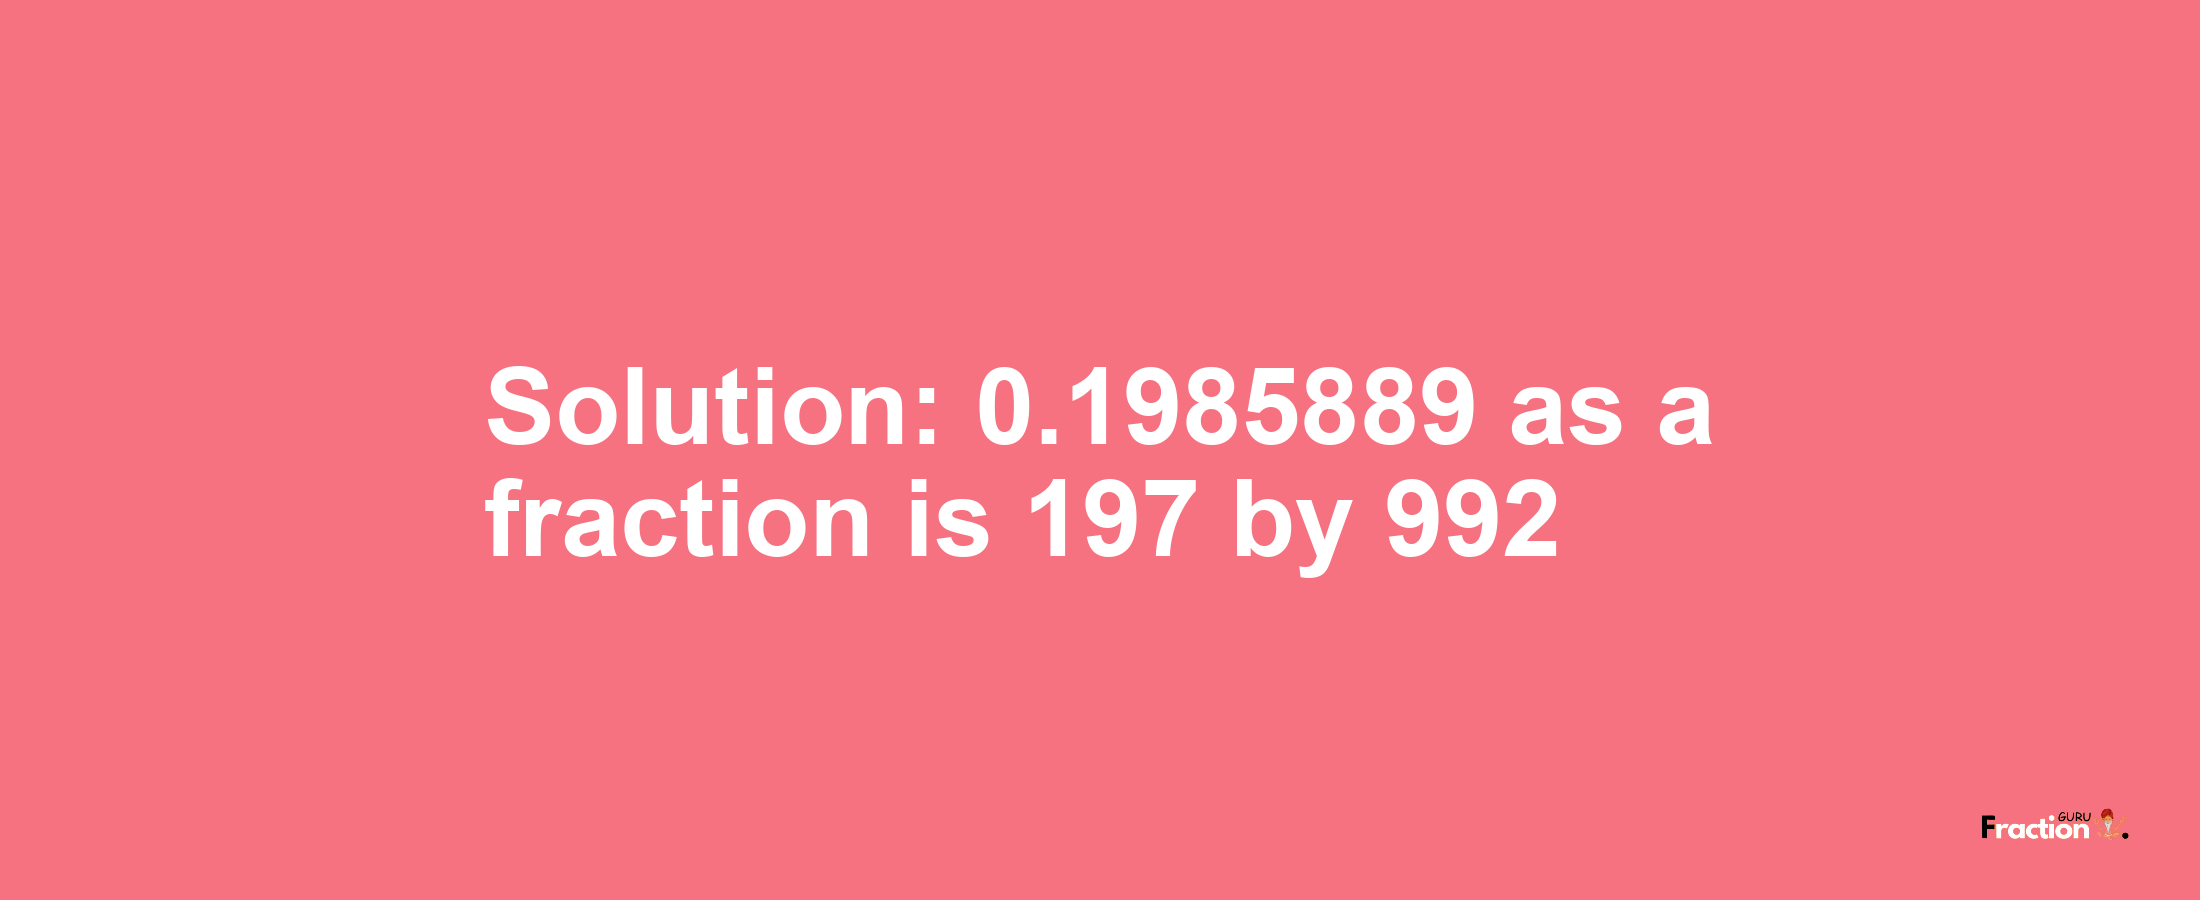 Solution:0.1985889 as a fraction is 197/992